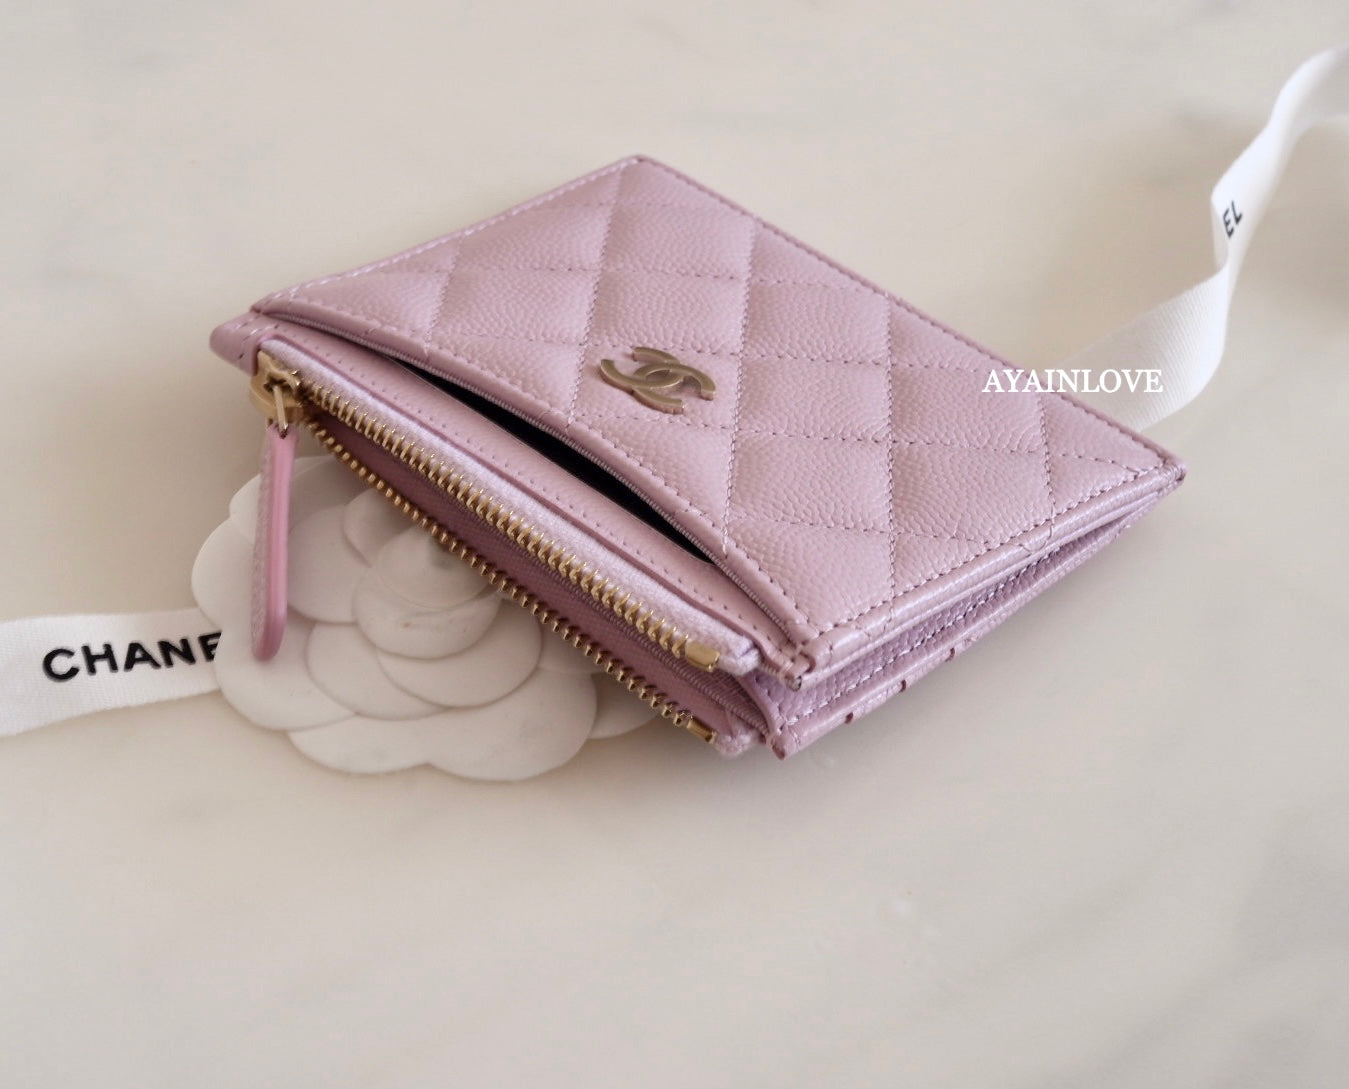 Chanel SLG Snap Card Holder, Lilac Caviar Leather with Silver Hardware, New  in Box GA002